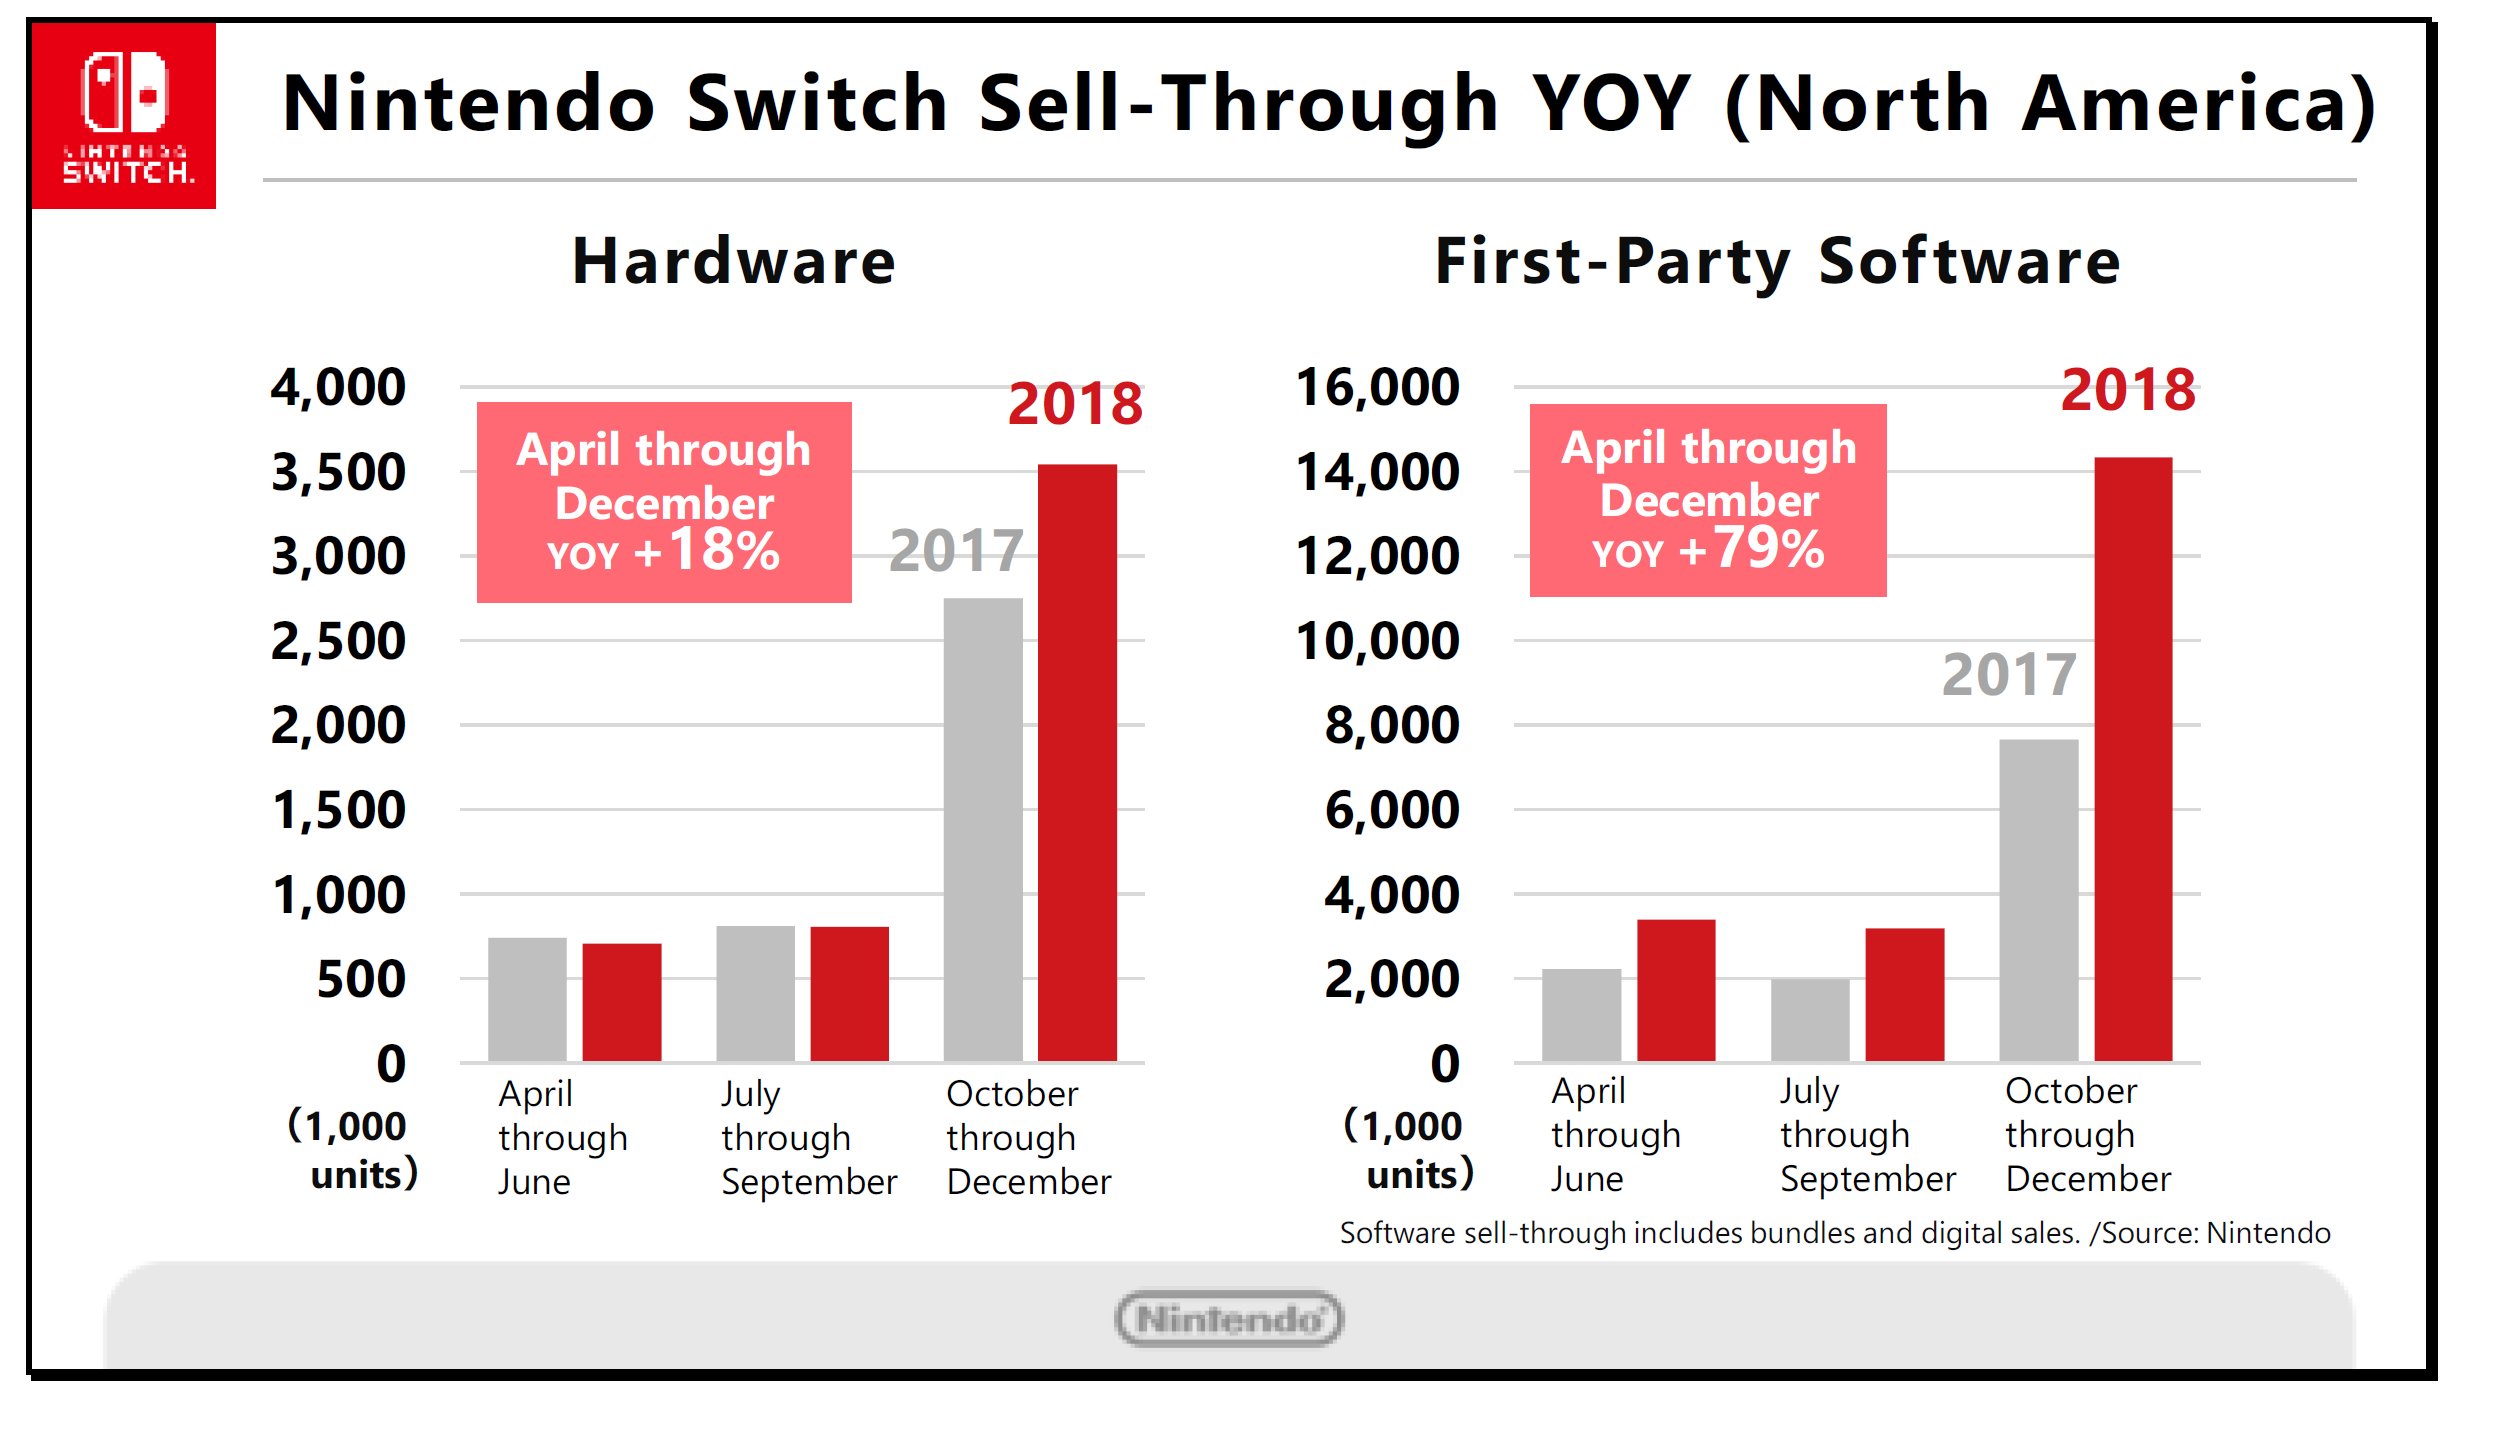 Nintendo on Switch sales in Japan, North America, and Europe